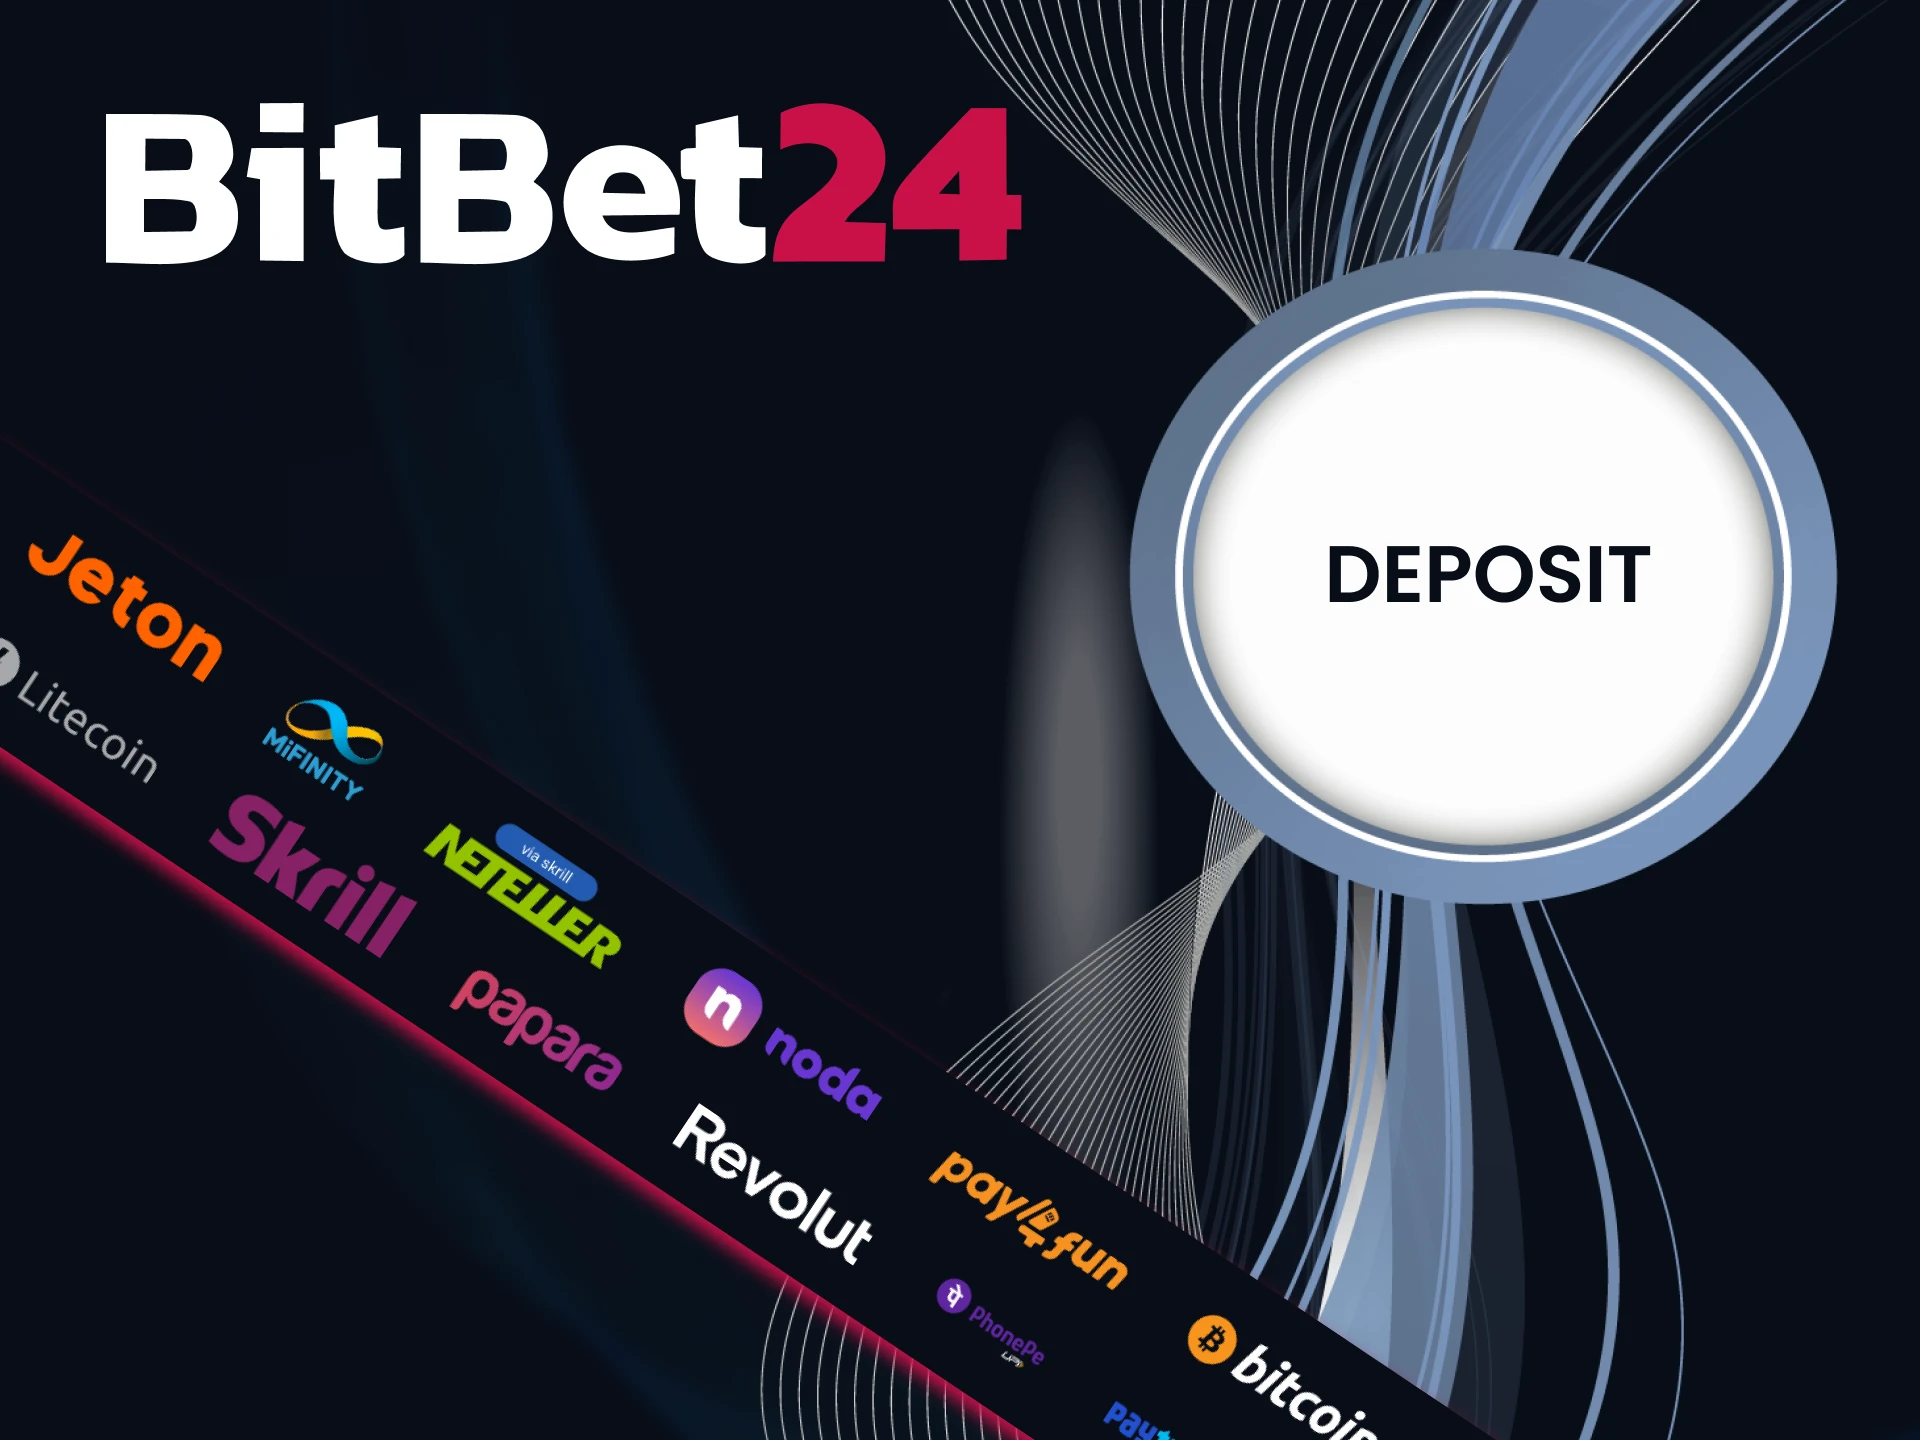 With BitBet24 you can easily make your first deosit.